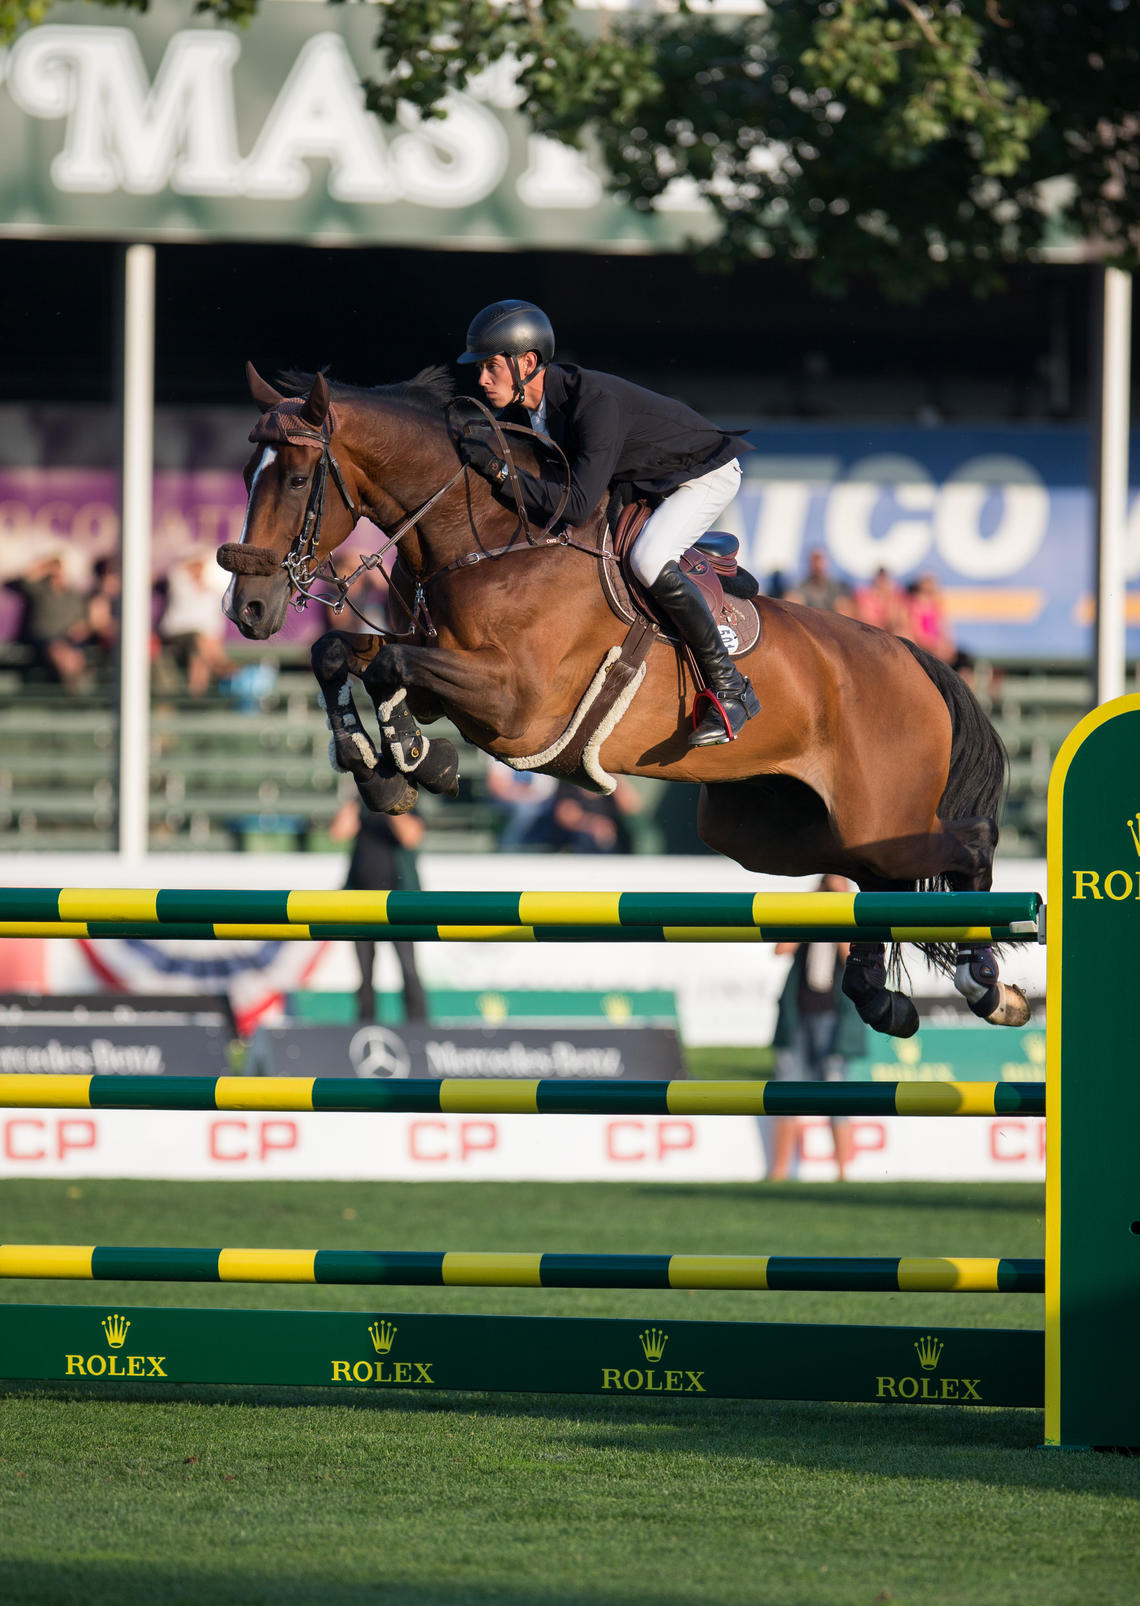 The Masters at Spruce Meadows plays host to world-class equine athletes and, this year, world-class equine researchers as well.